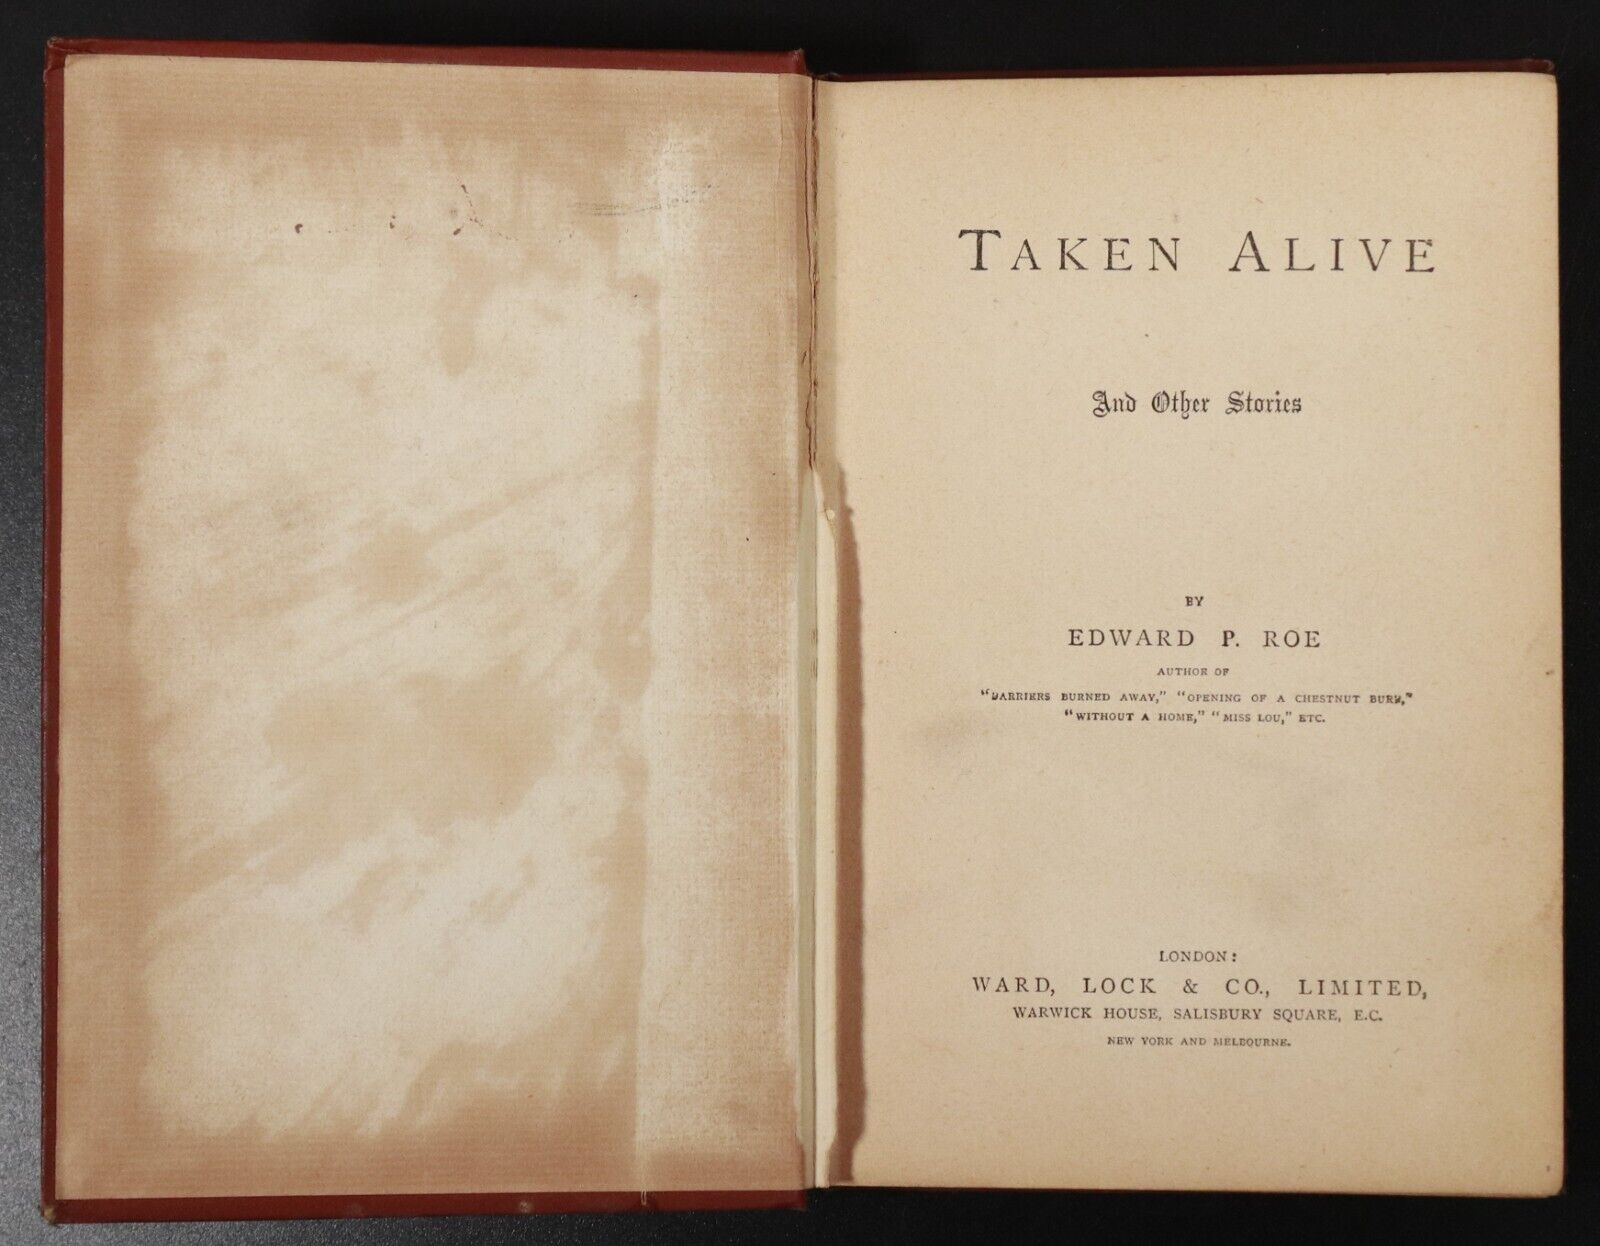 c1910 Taken Alive & Other Stories by E.P. Roe Antique Fiction Book - 0